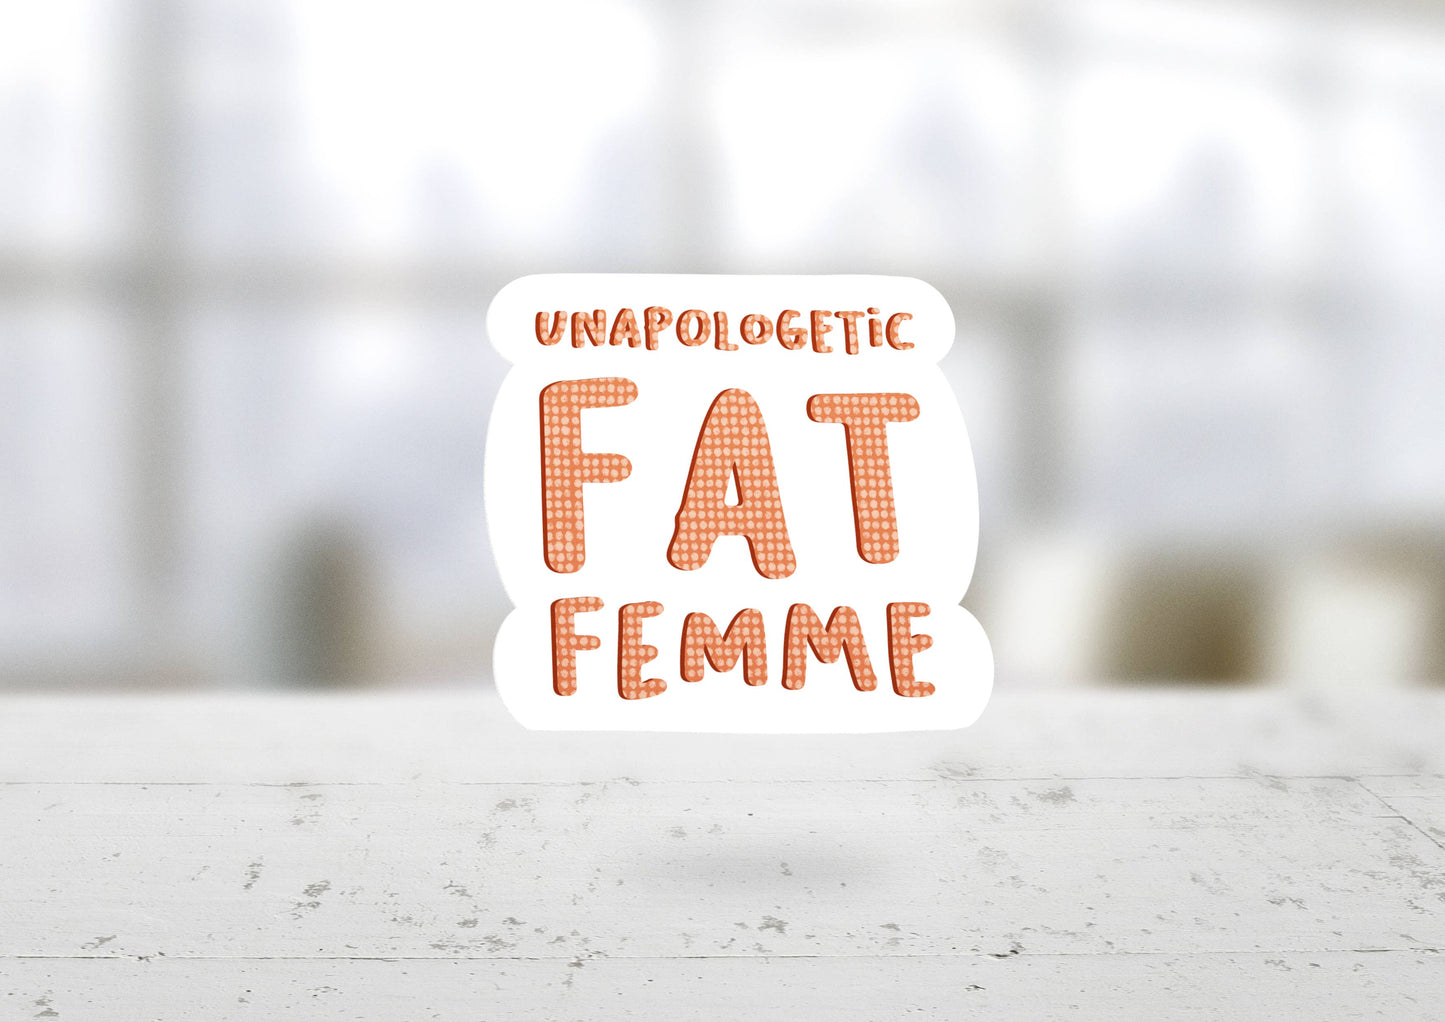 Liv Lyszyk Prints - Unapologetic Fat Femme Body Positive Glossy Sticker